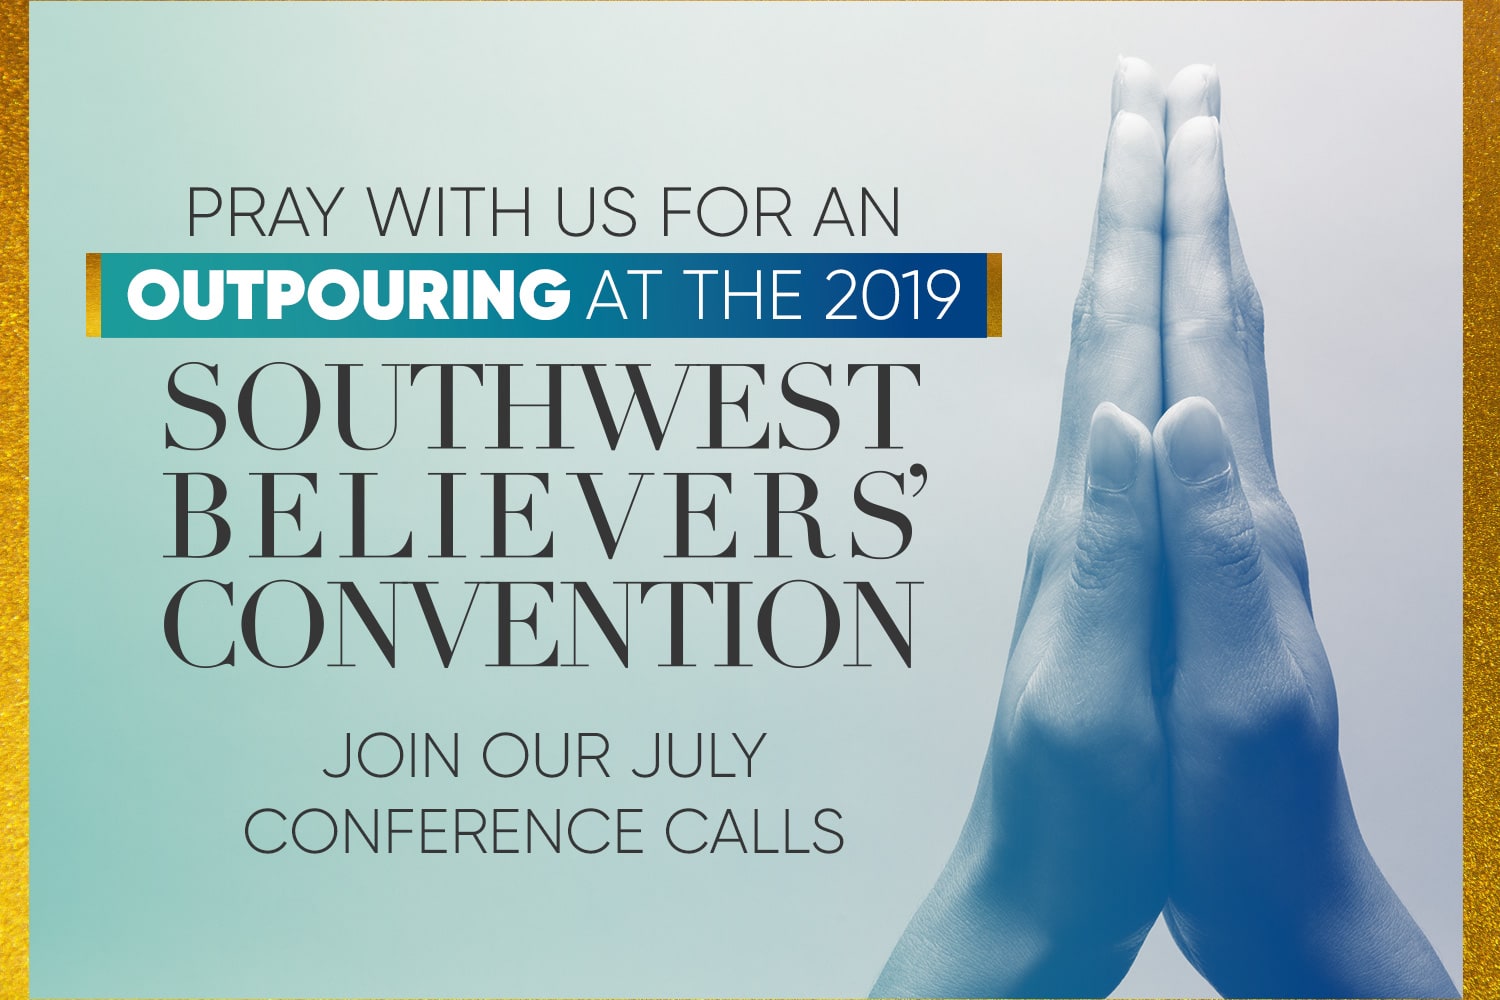 Prayer Conference Calls for Southwest Believers' Convention